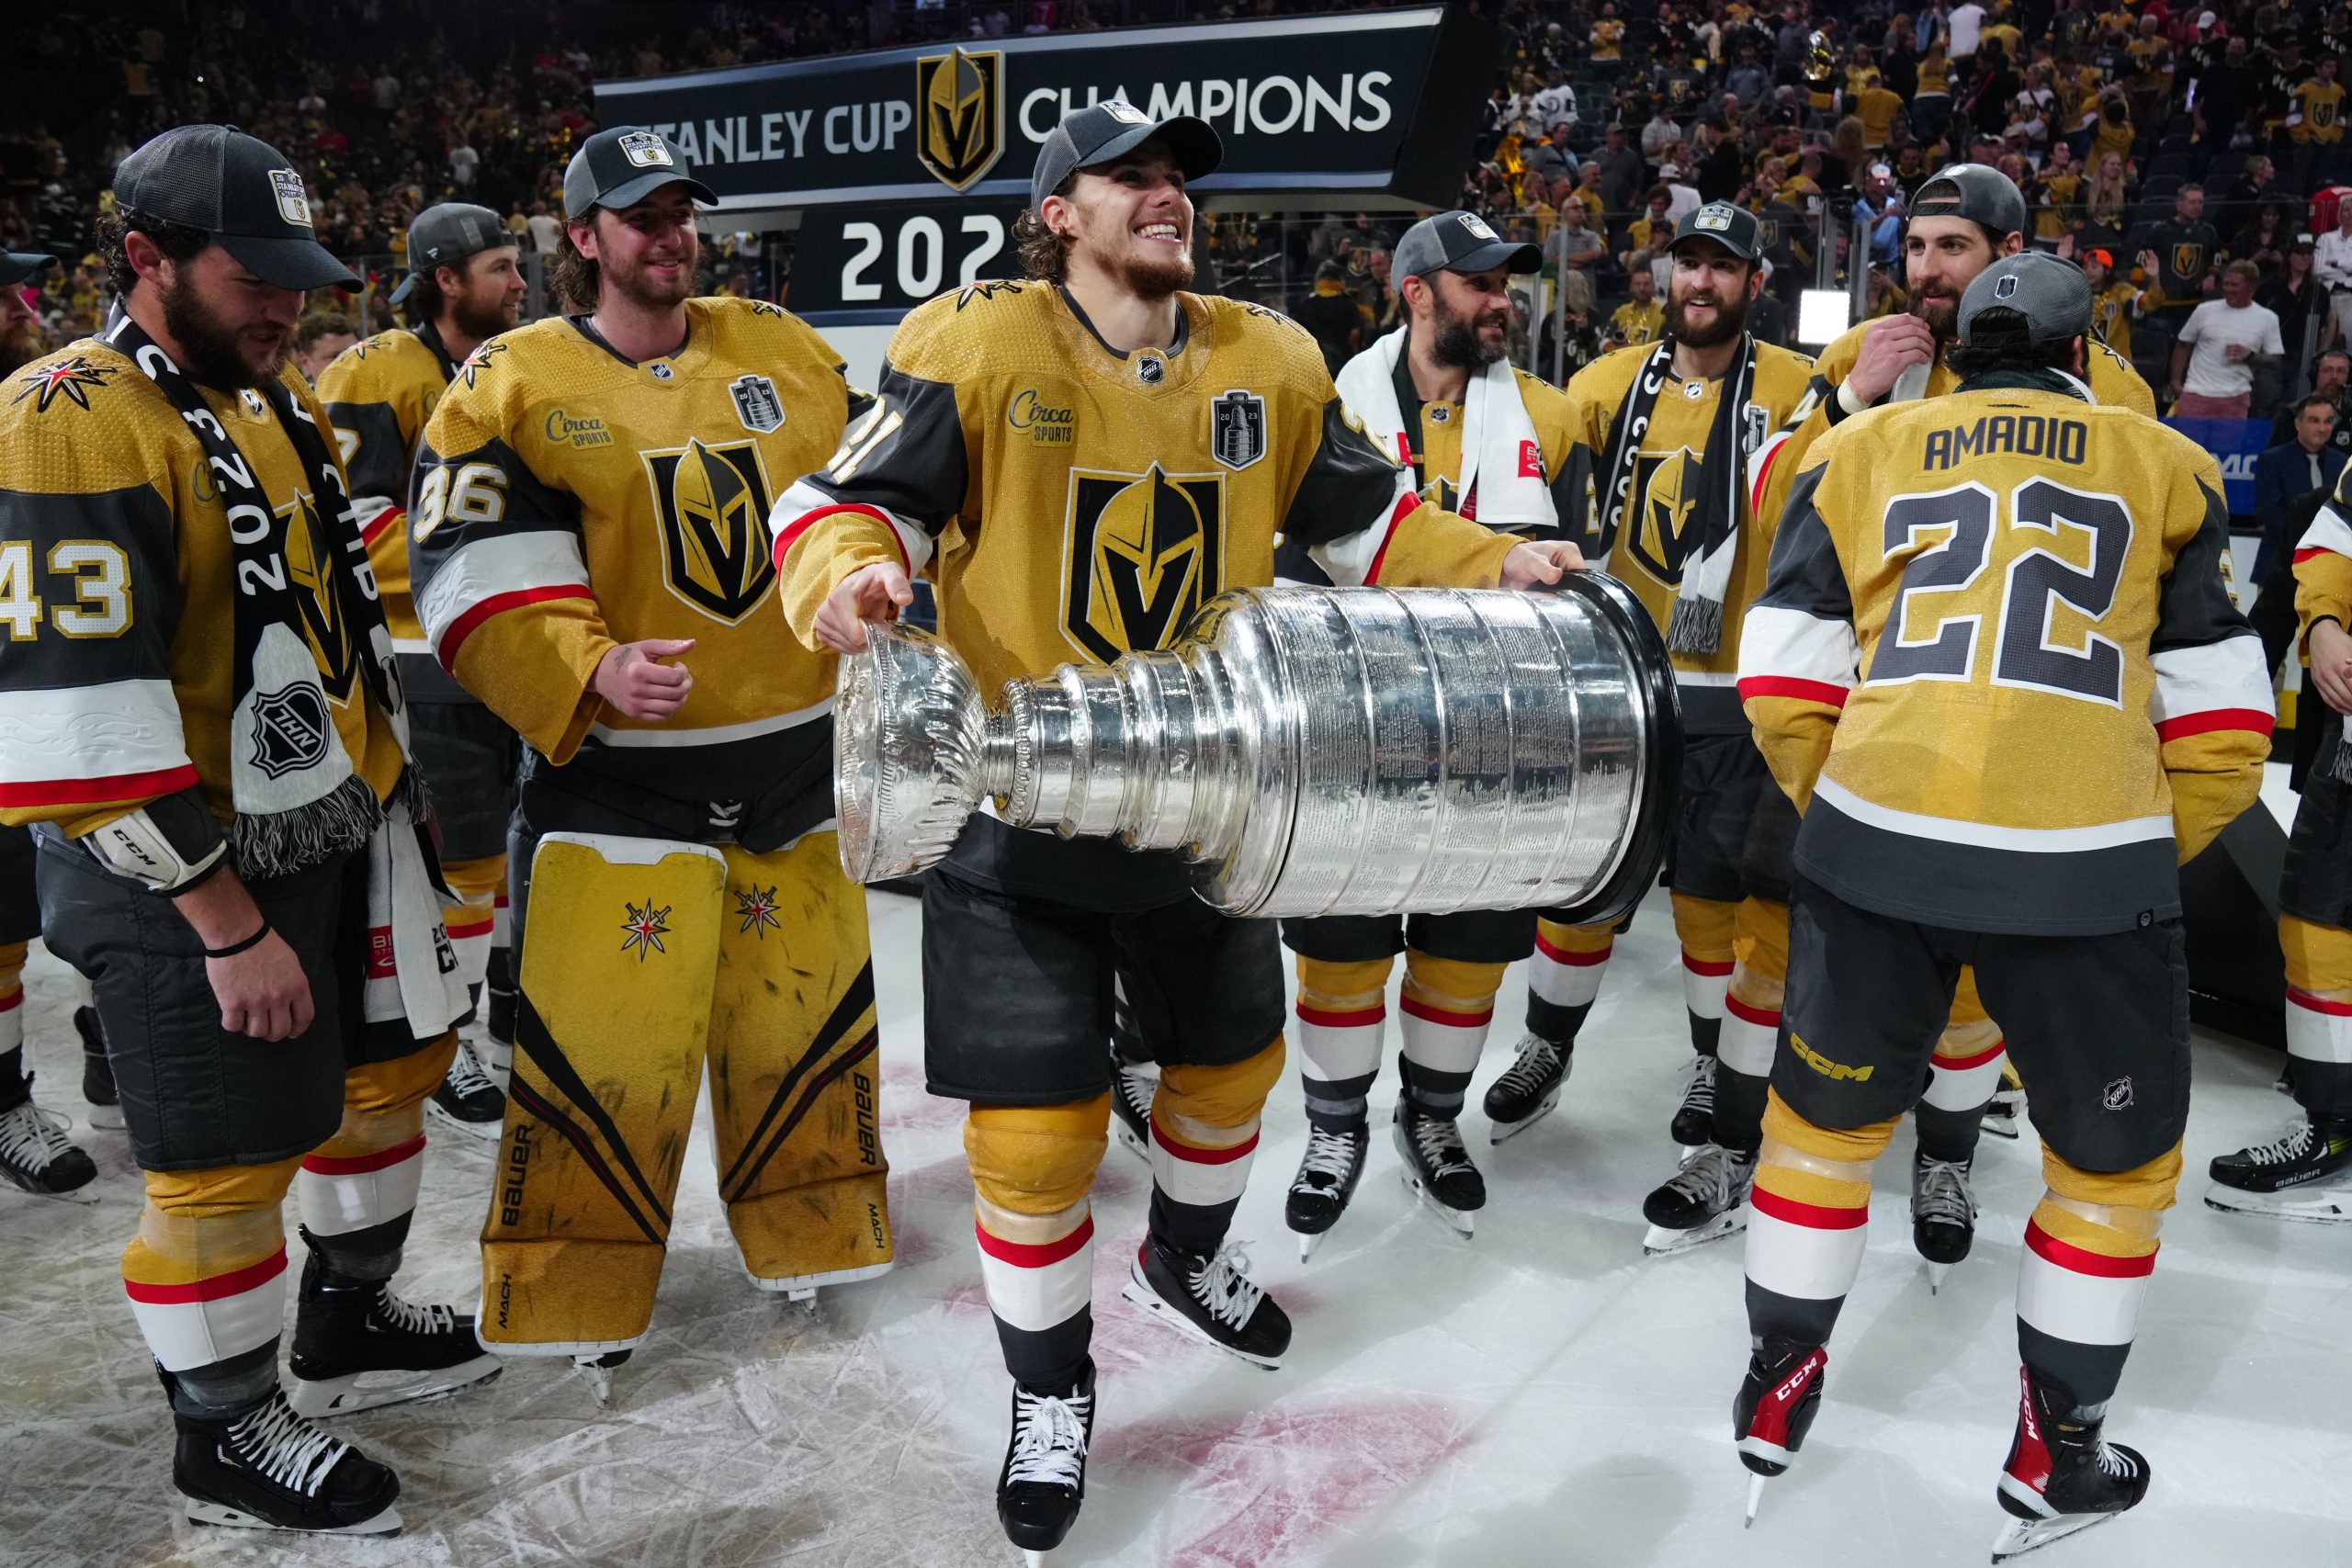 First Nations players to face off in Stanley Cup championship